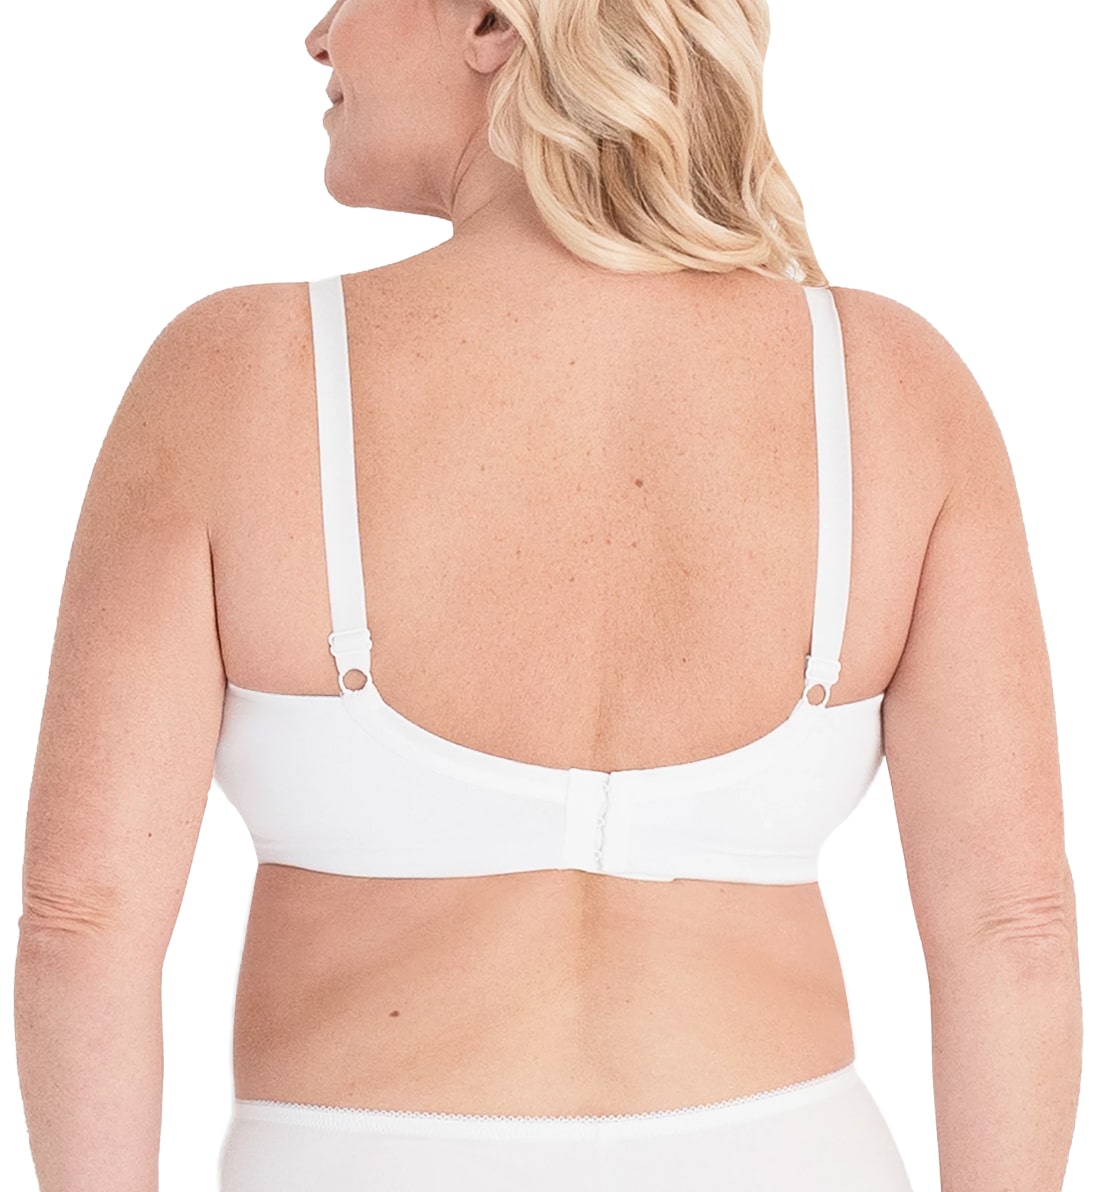 Leading Lady Wirefree Lace Trim Comfort Softcup Bra (5072),36 B/C/D,White - White,36 B/C/D